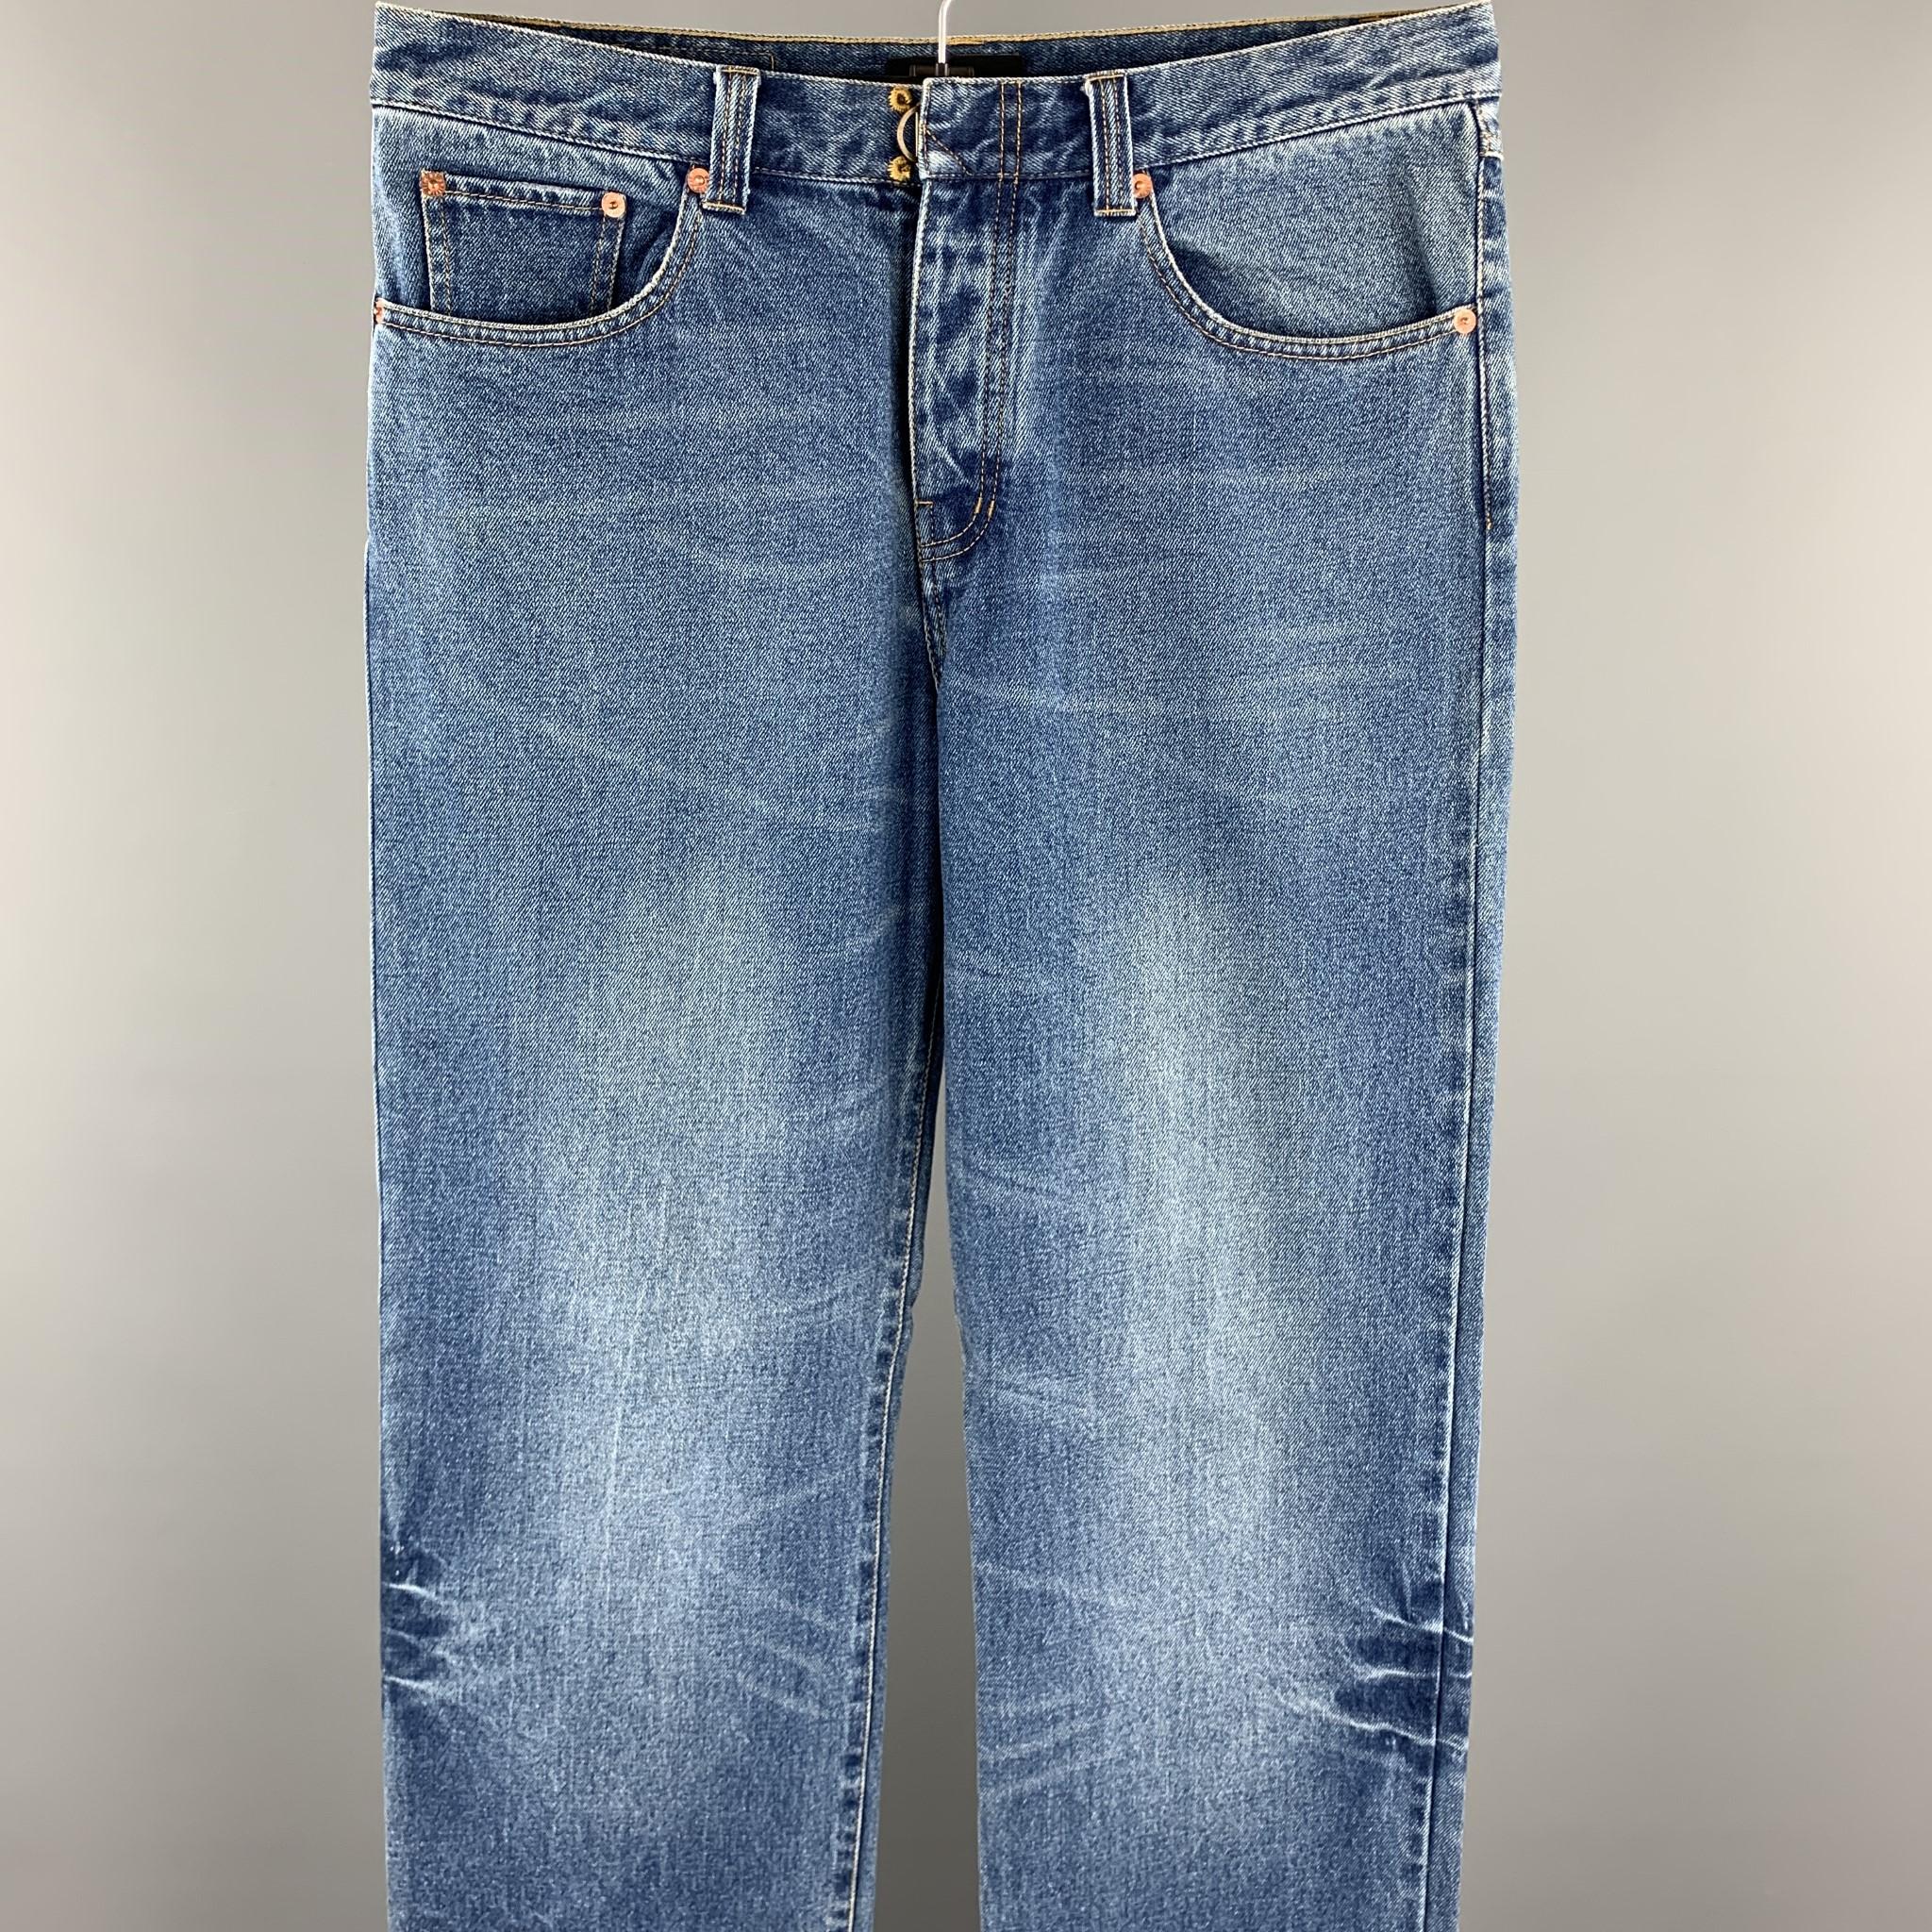 3.1 PHILLIP LIM Jeans comes in a indigo washed denim featuring a hook & eye with a button fly closure. Made in Italy. 

Excellent Pre-Owned Condition.
Marked: 33

Measurements:

Waist: 33 in. 
Rise: 10 in. 
Inseam: 34 in. 

SKU: 88056
Category: